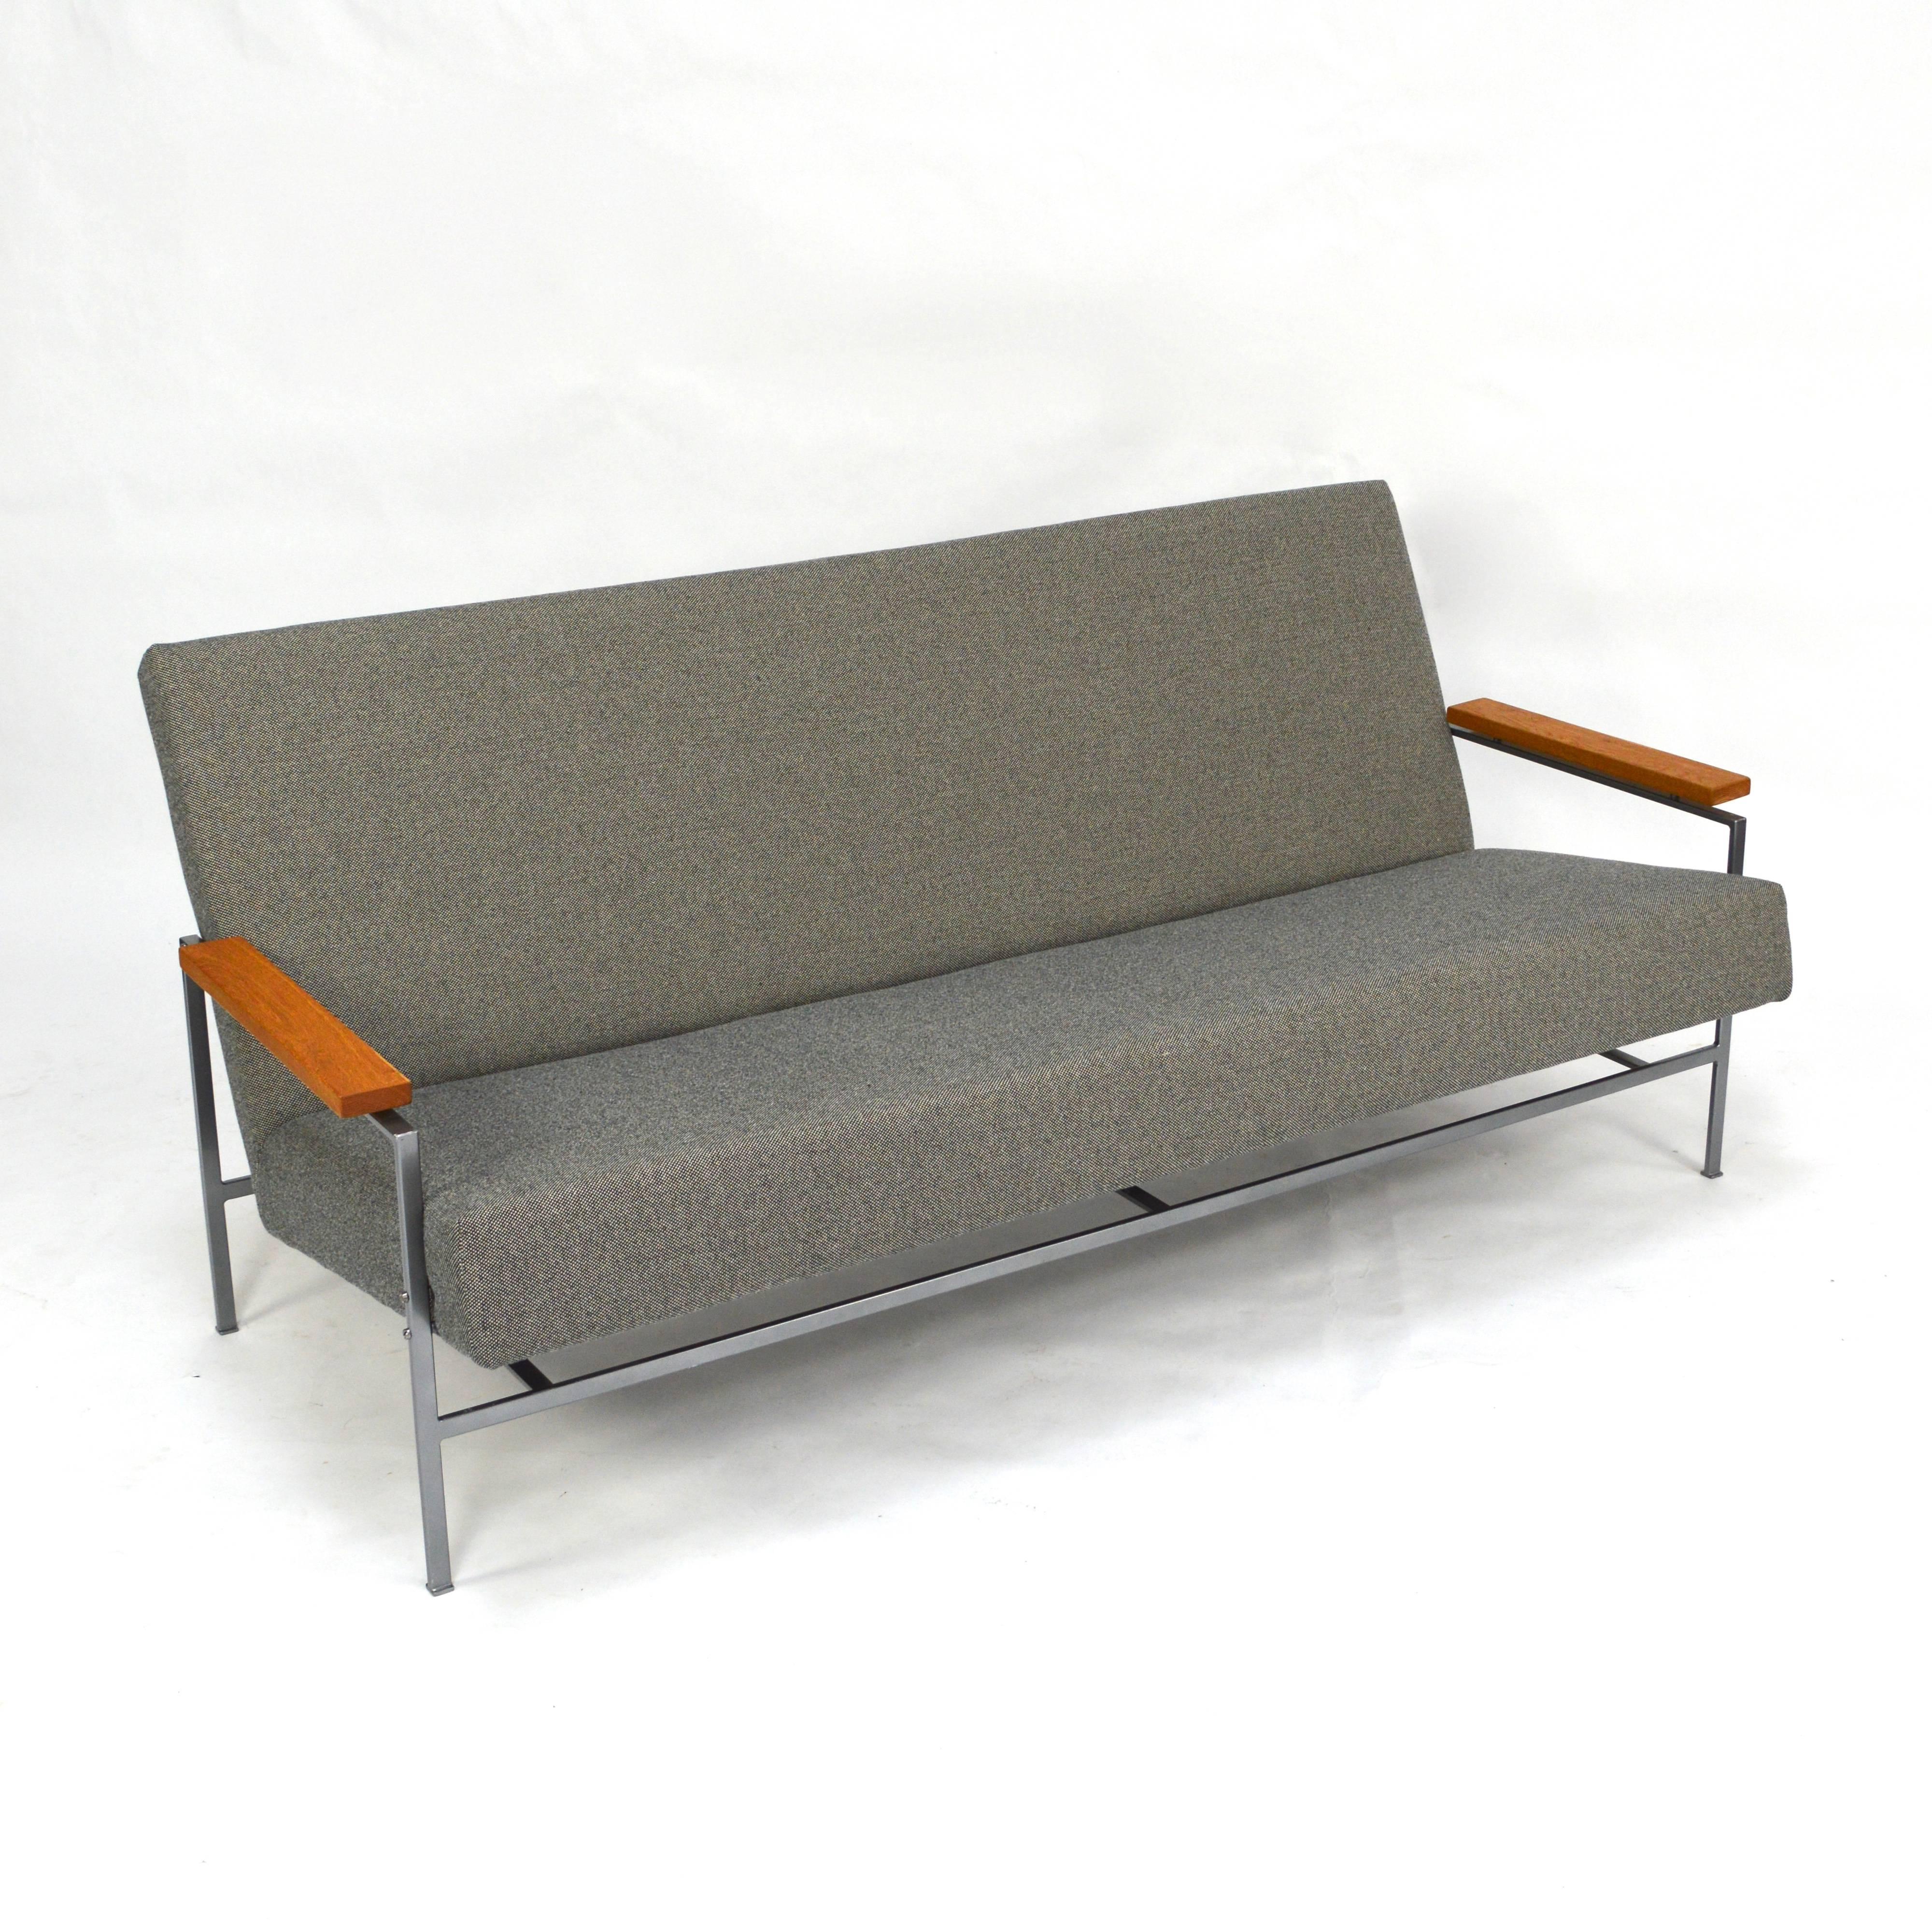 Beautiful reupholstered sofa by Rob Parry for Gelderland.

New fabric and foam interior. With very rare solid oak armrests that match beautiful with the metal frame and grey/black upholstery! Usually the armrests are made of teak.

Rob Parry was